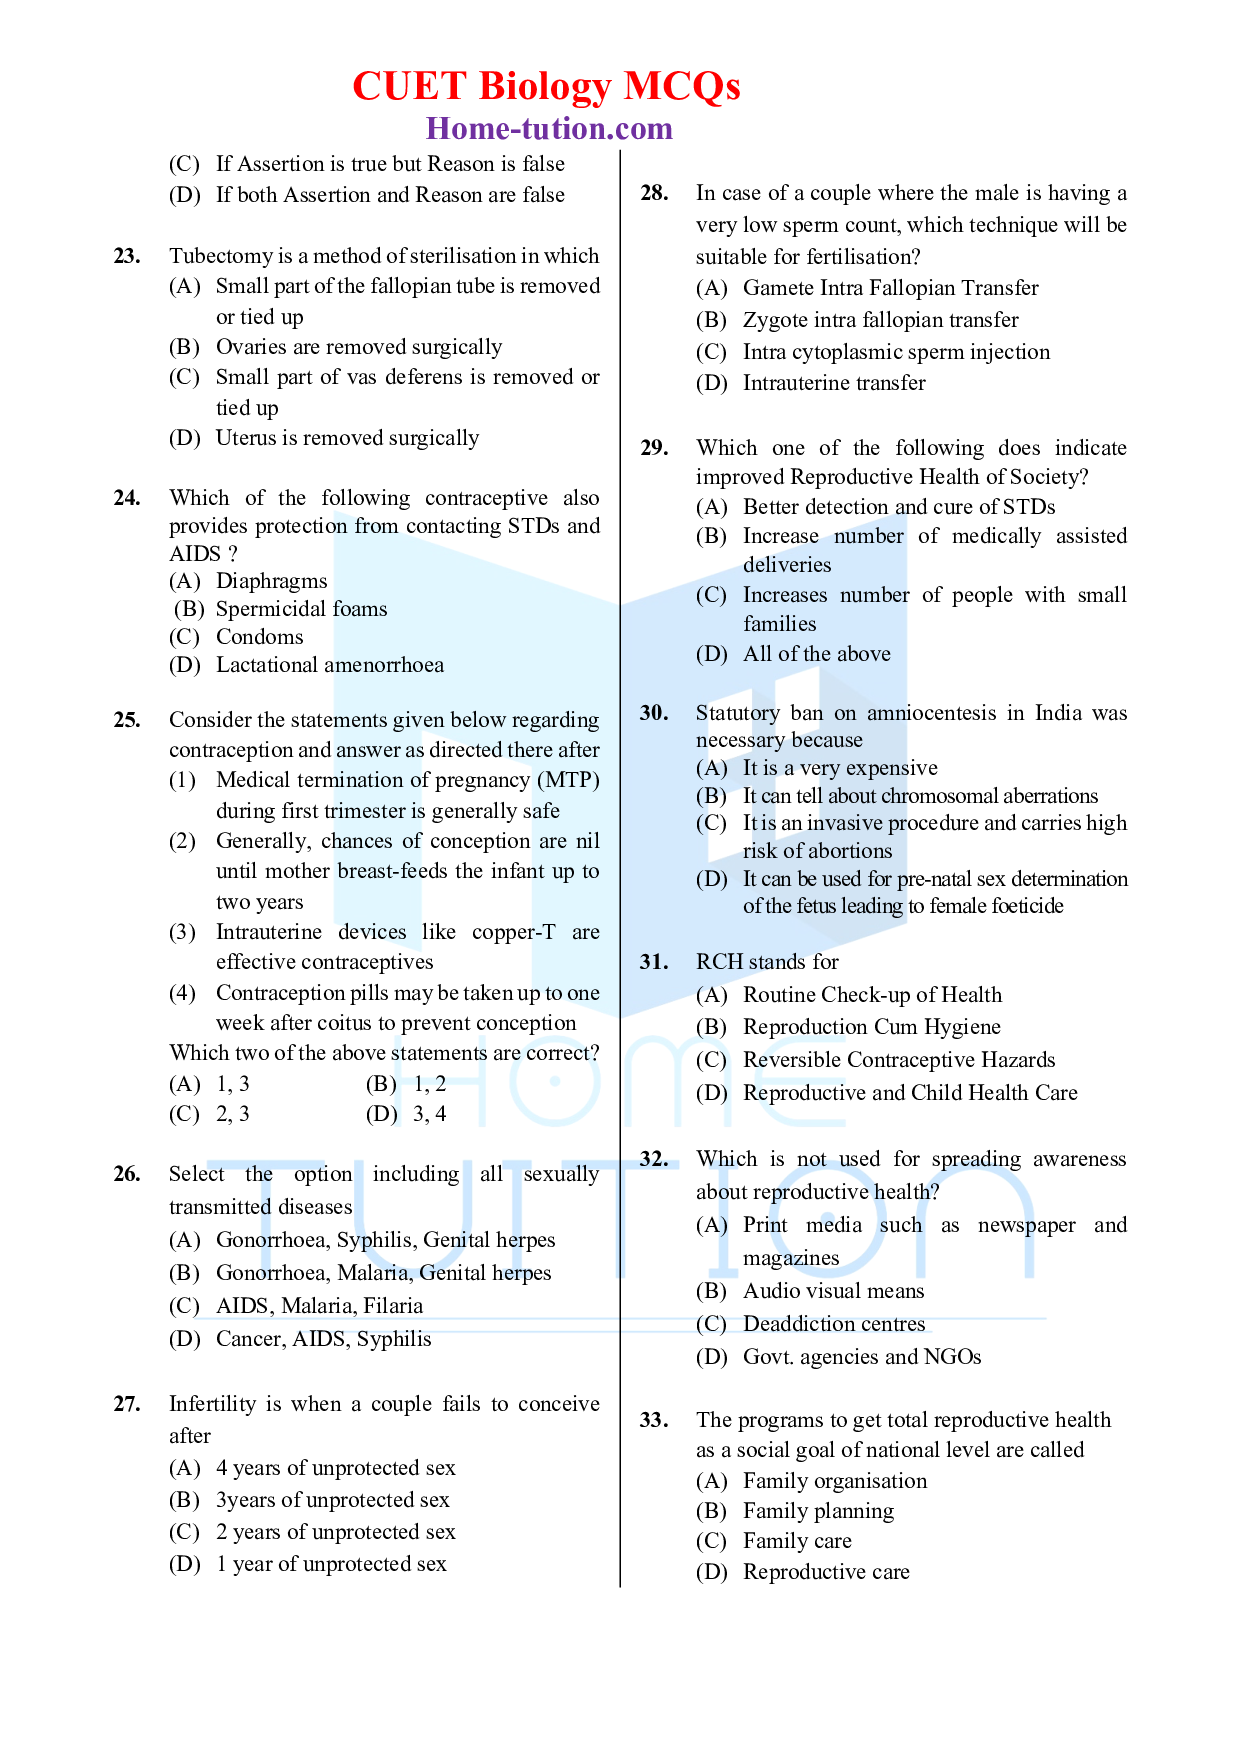 Biology MCQ Questions for CUET Chapter 4 Reproductive Health